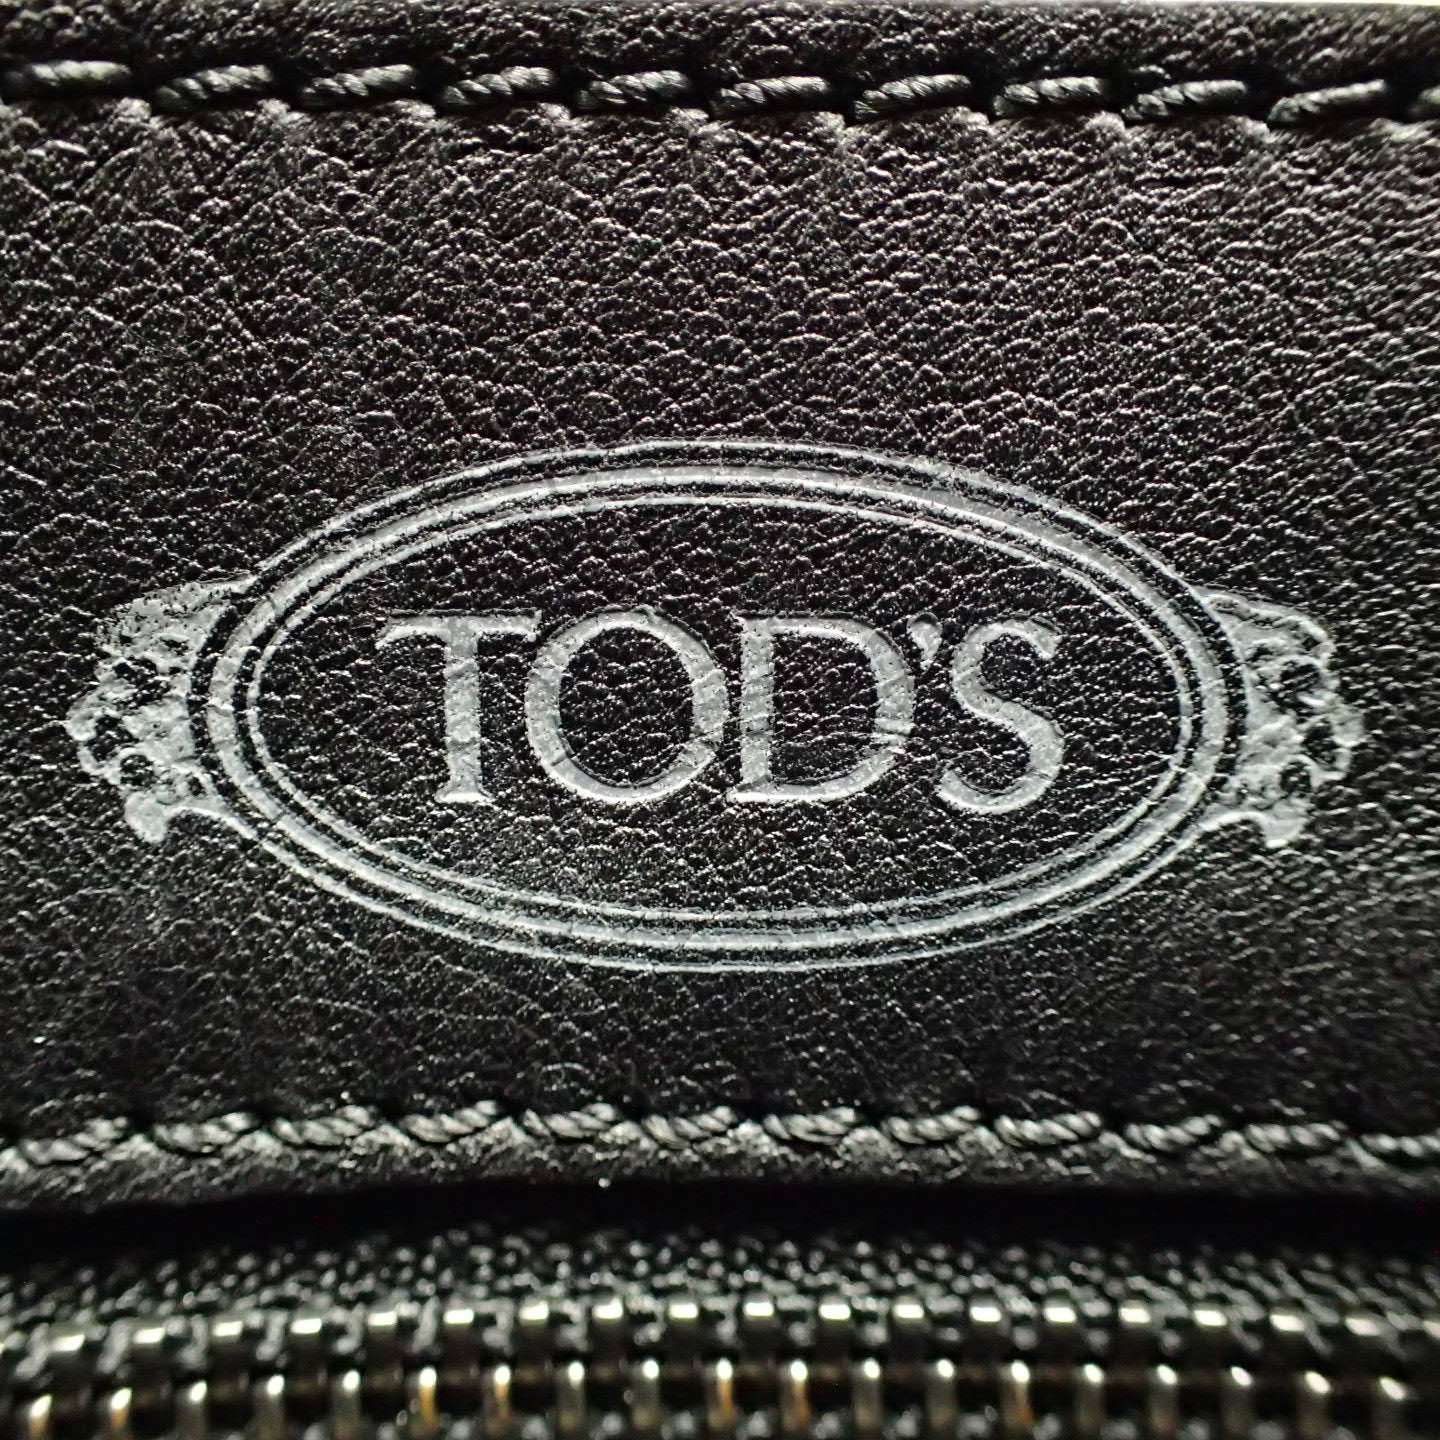 TOD'S tote bag suede leather switching TOD'S [AFE2] [Used] 